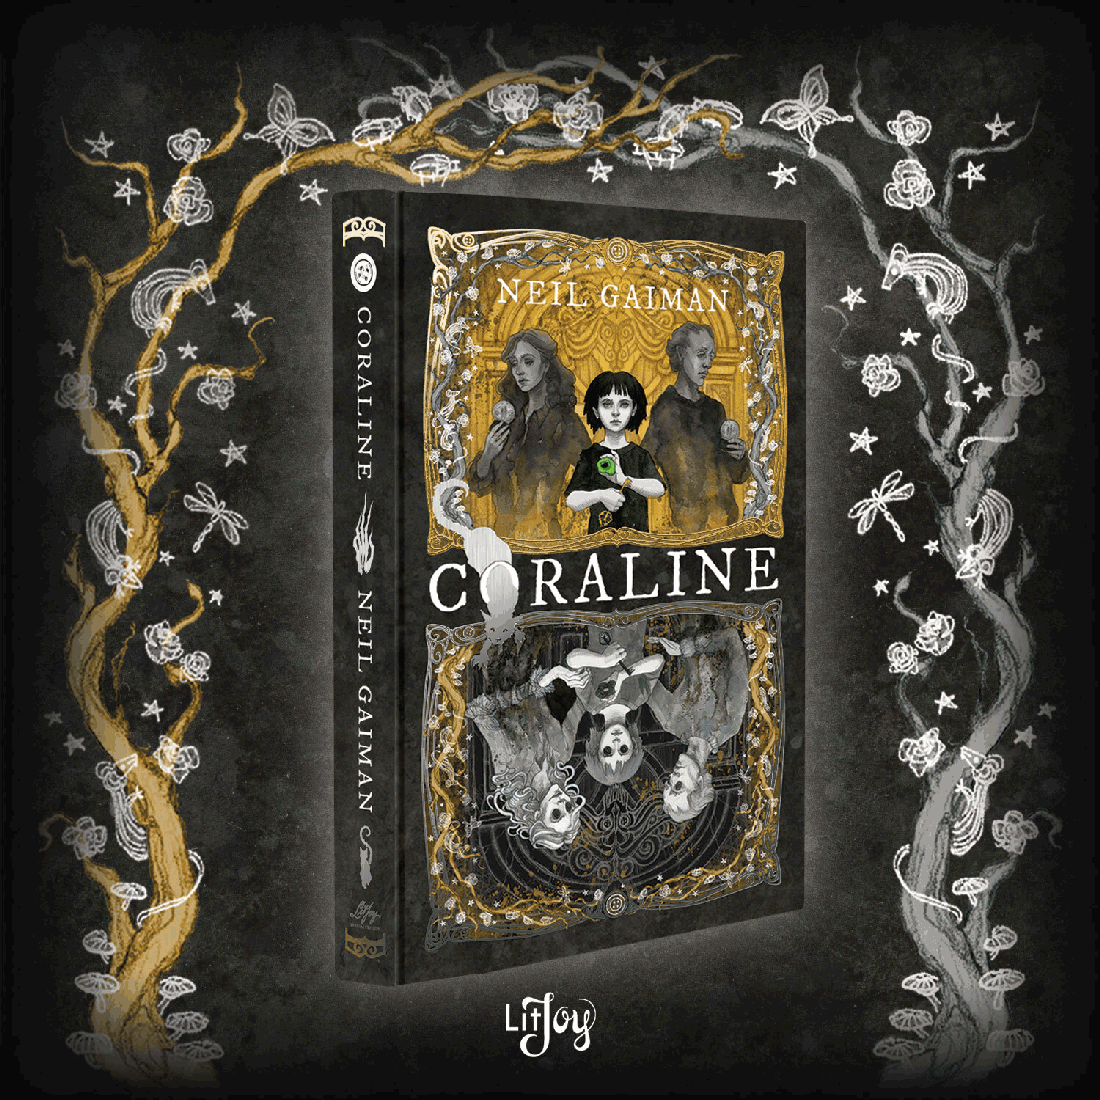 Coraline Illustrated Special Edition book cover